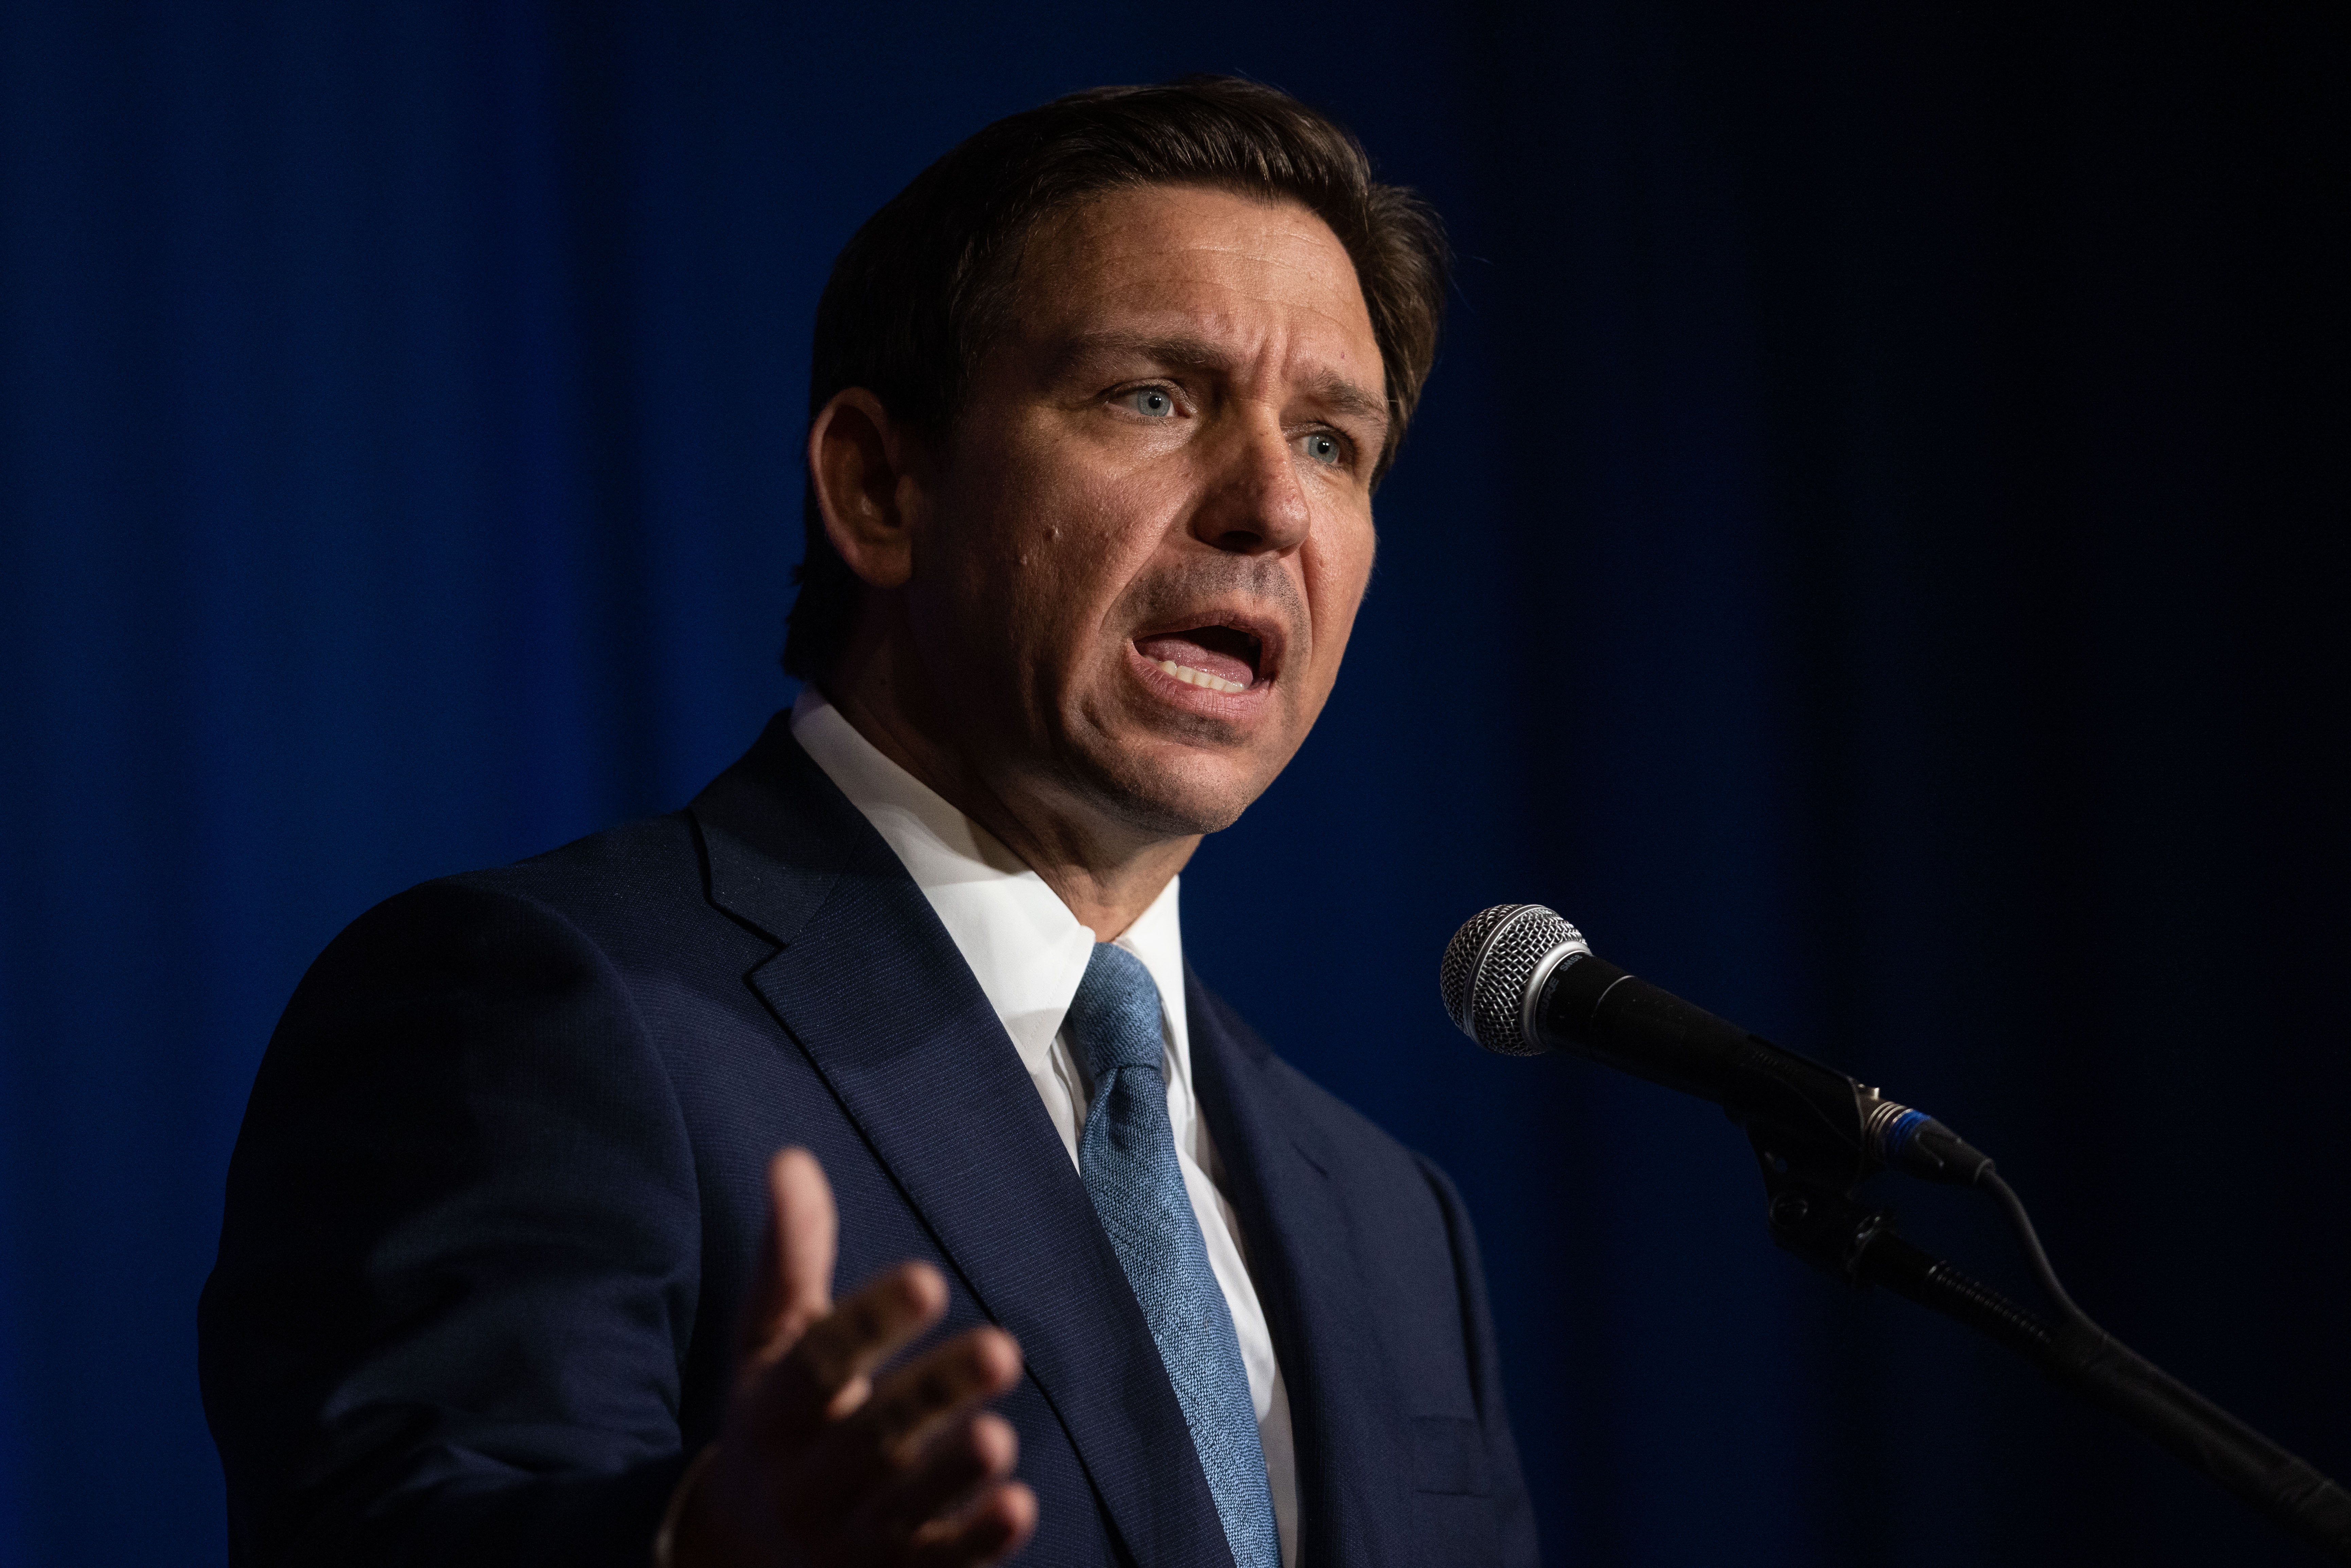 Ron DeSantis speaks in front of a microphone.